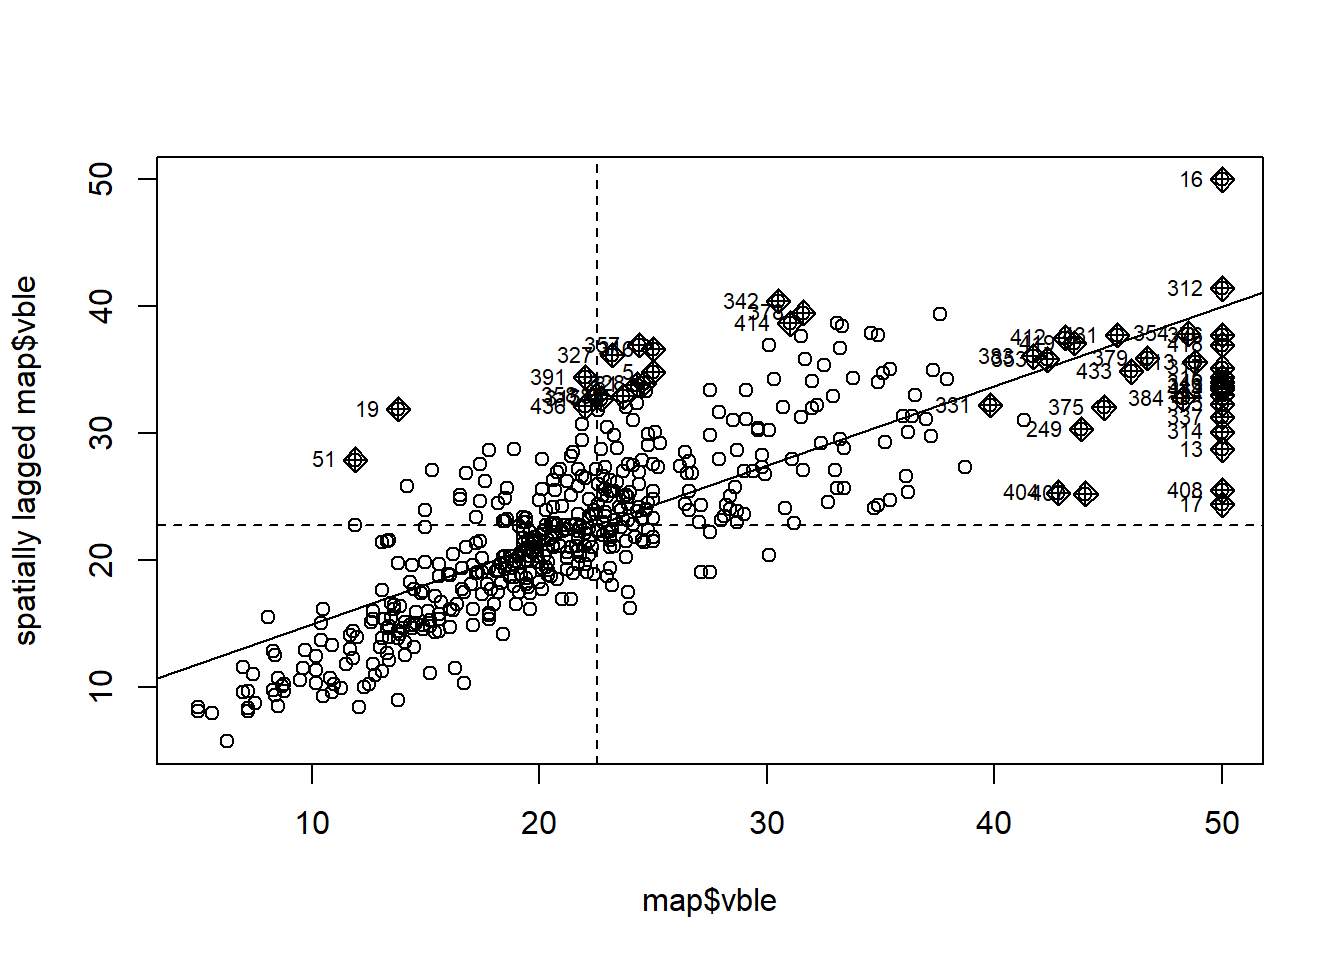 Moran's $I$ scatterplot showing the observations against its spatially lagged values.